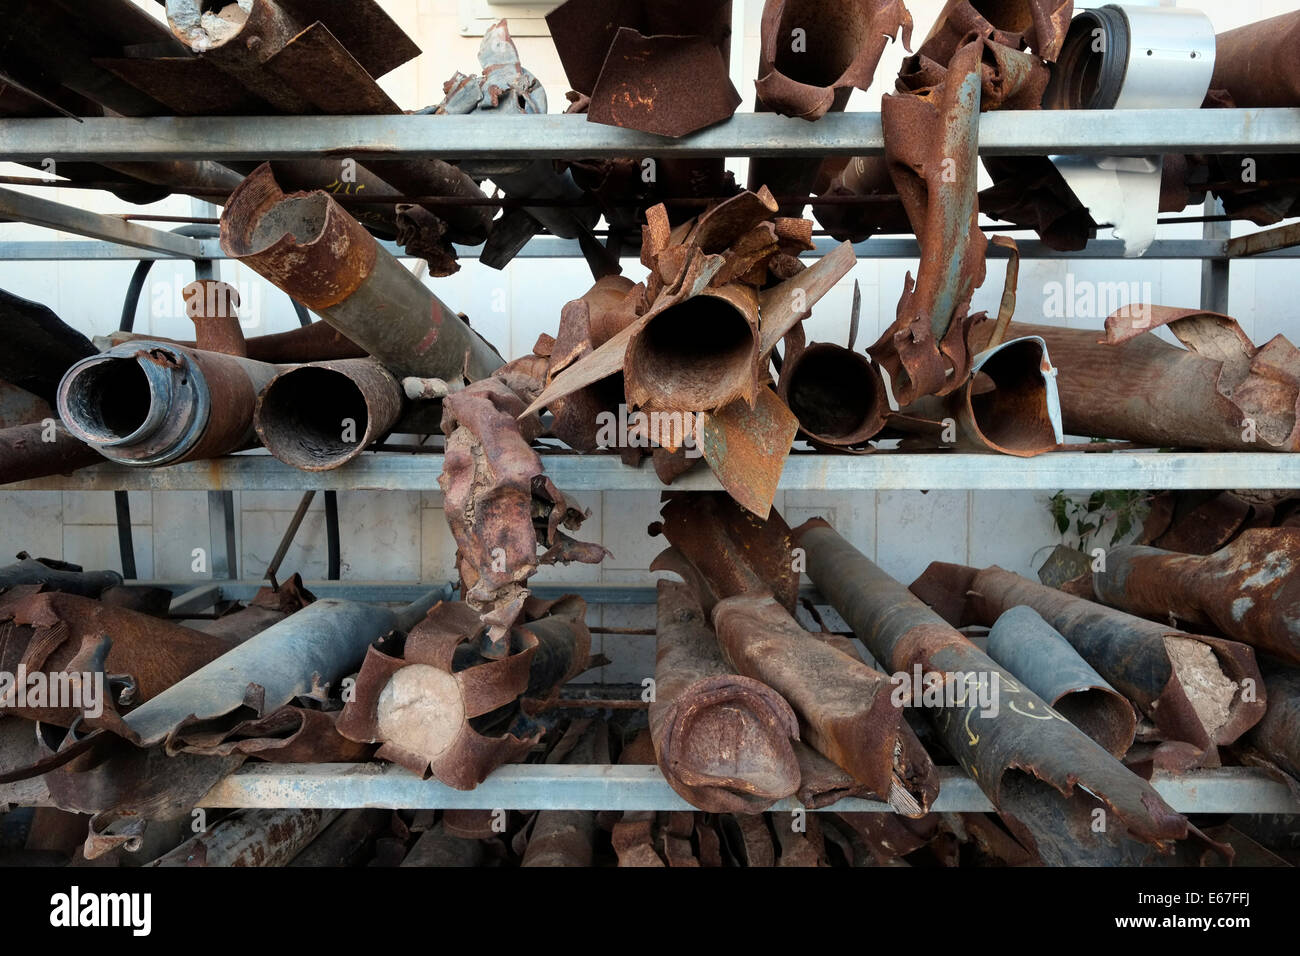 Remnants of several types of exploded Qassam rockets that were fired by Palestinian militants from Gaza Strip to southern Israel is displayed at the police station in the town of Sderot southern Israel Stock Photo